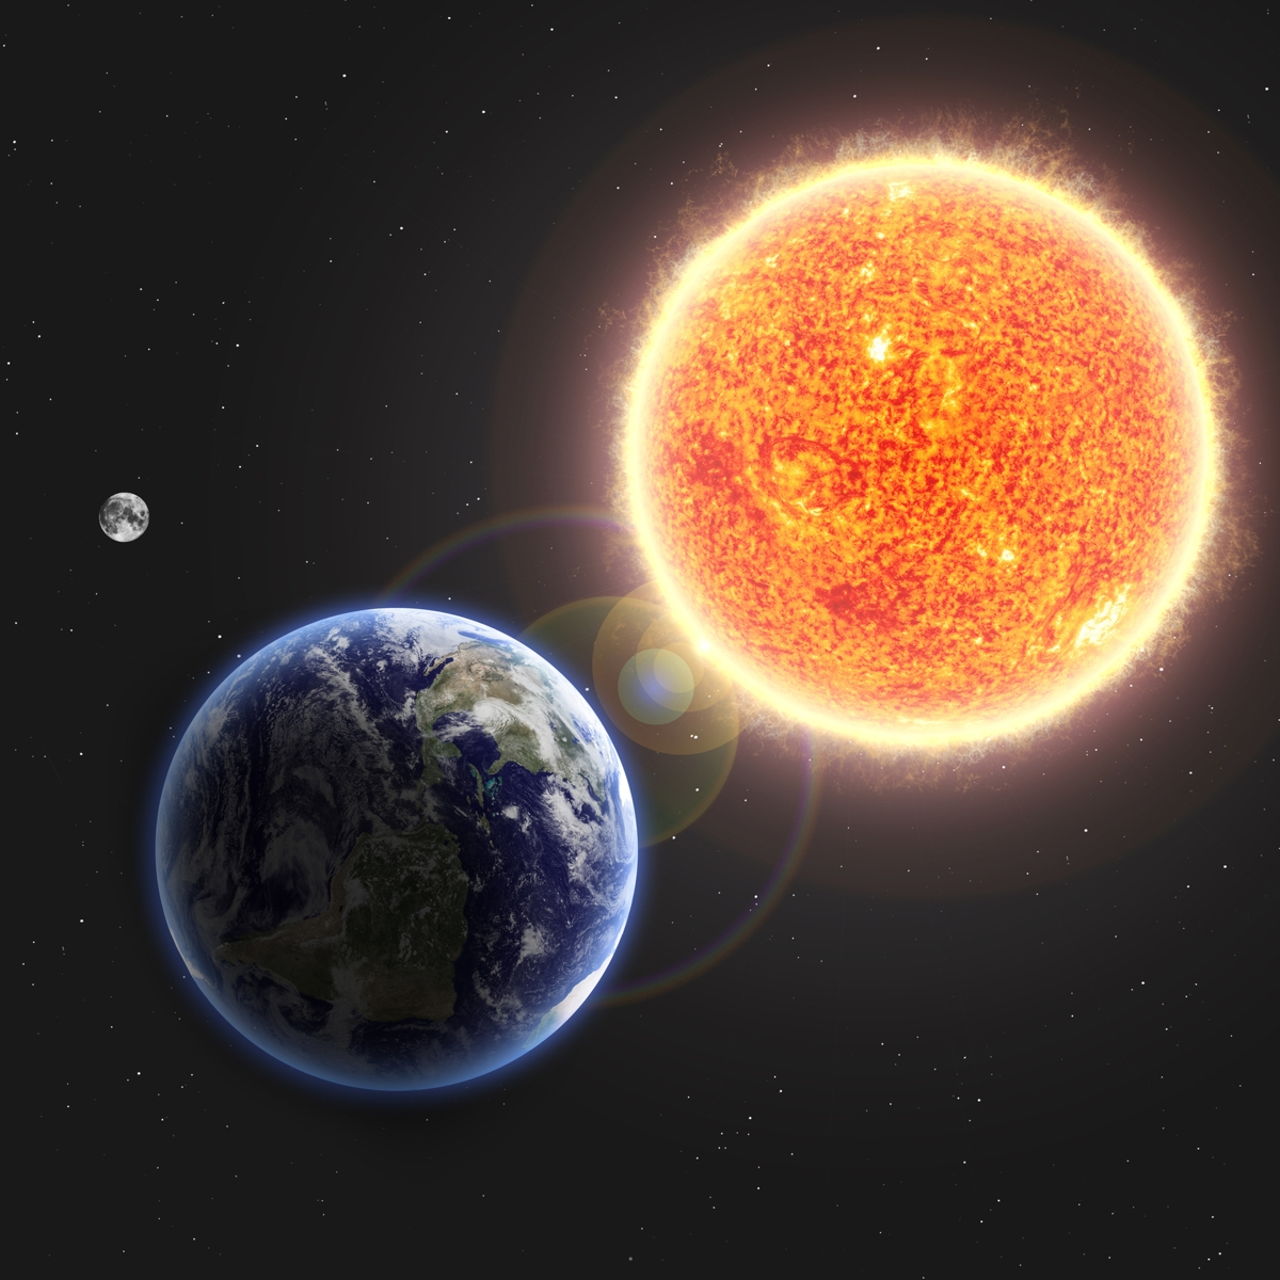 Let's End the Debate on Which is Bigger - The Earth or Sun ...